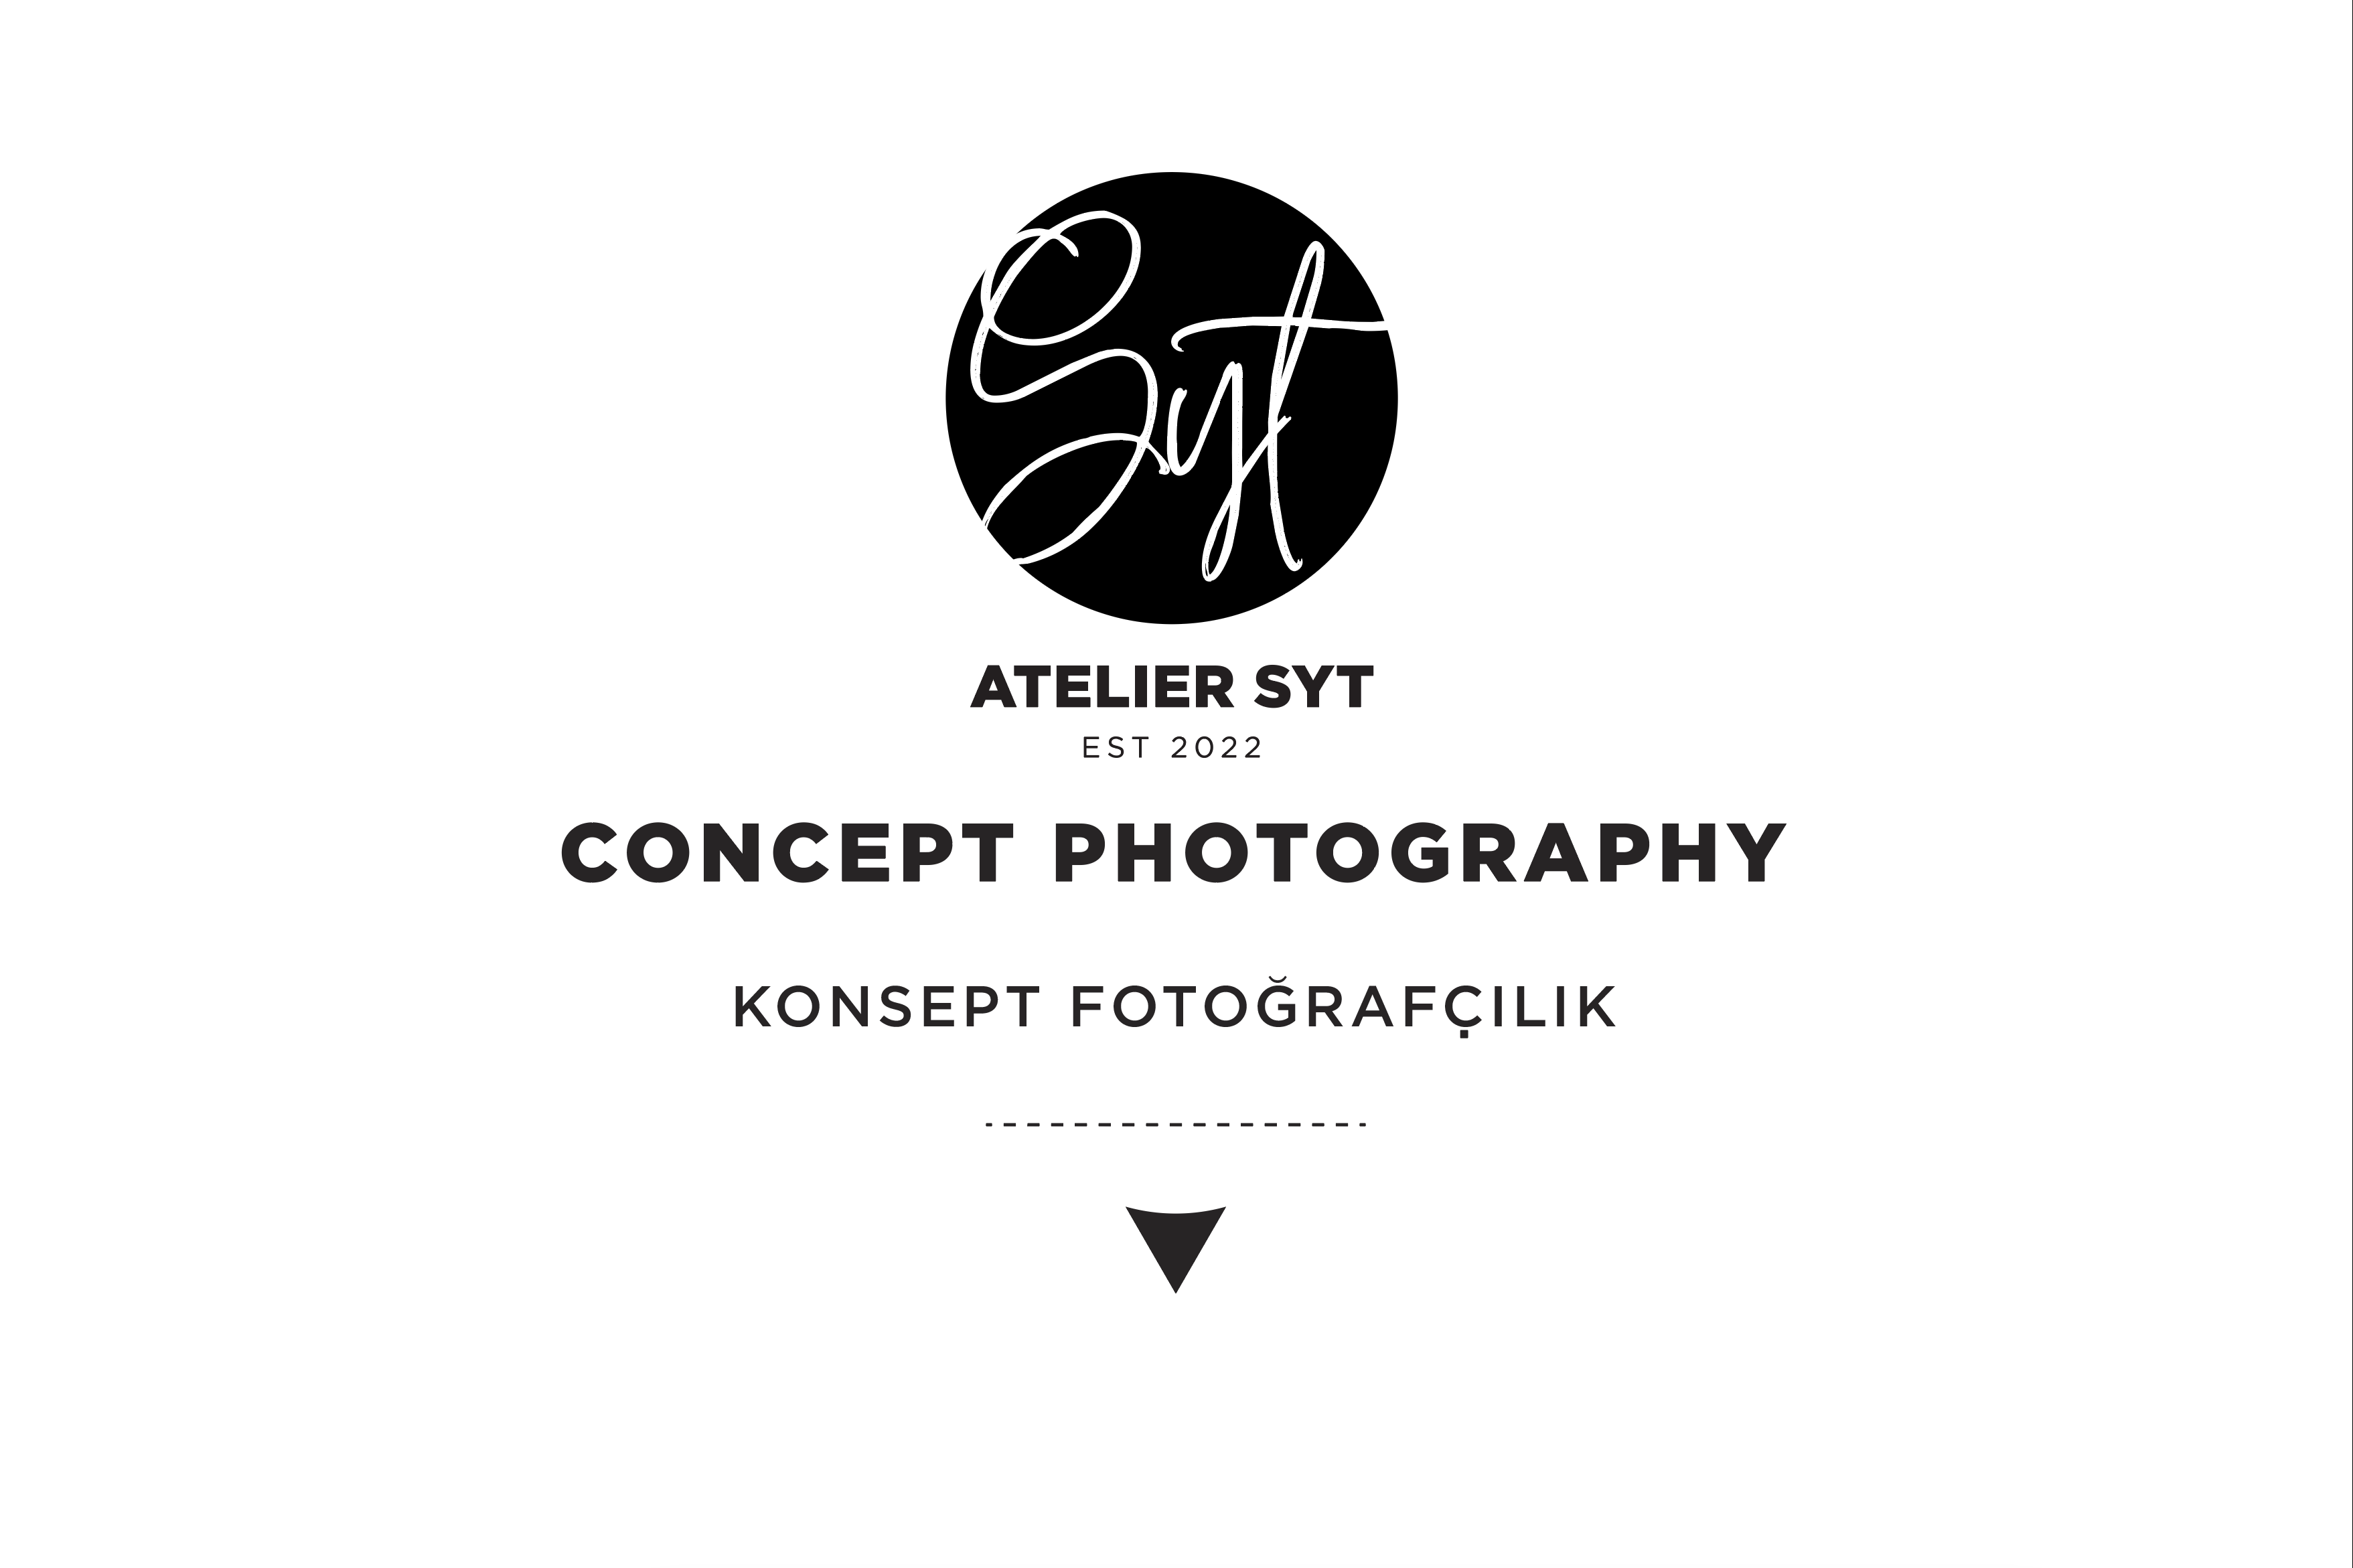 SYT Atelier- Concept Photography